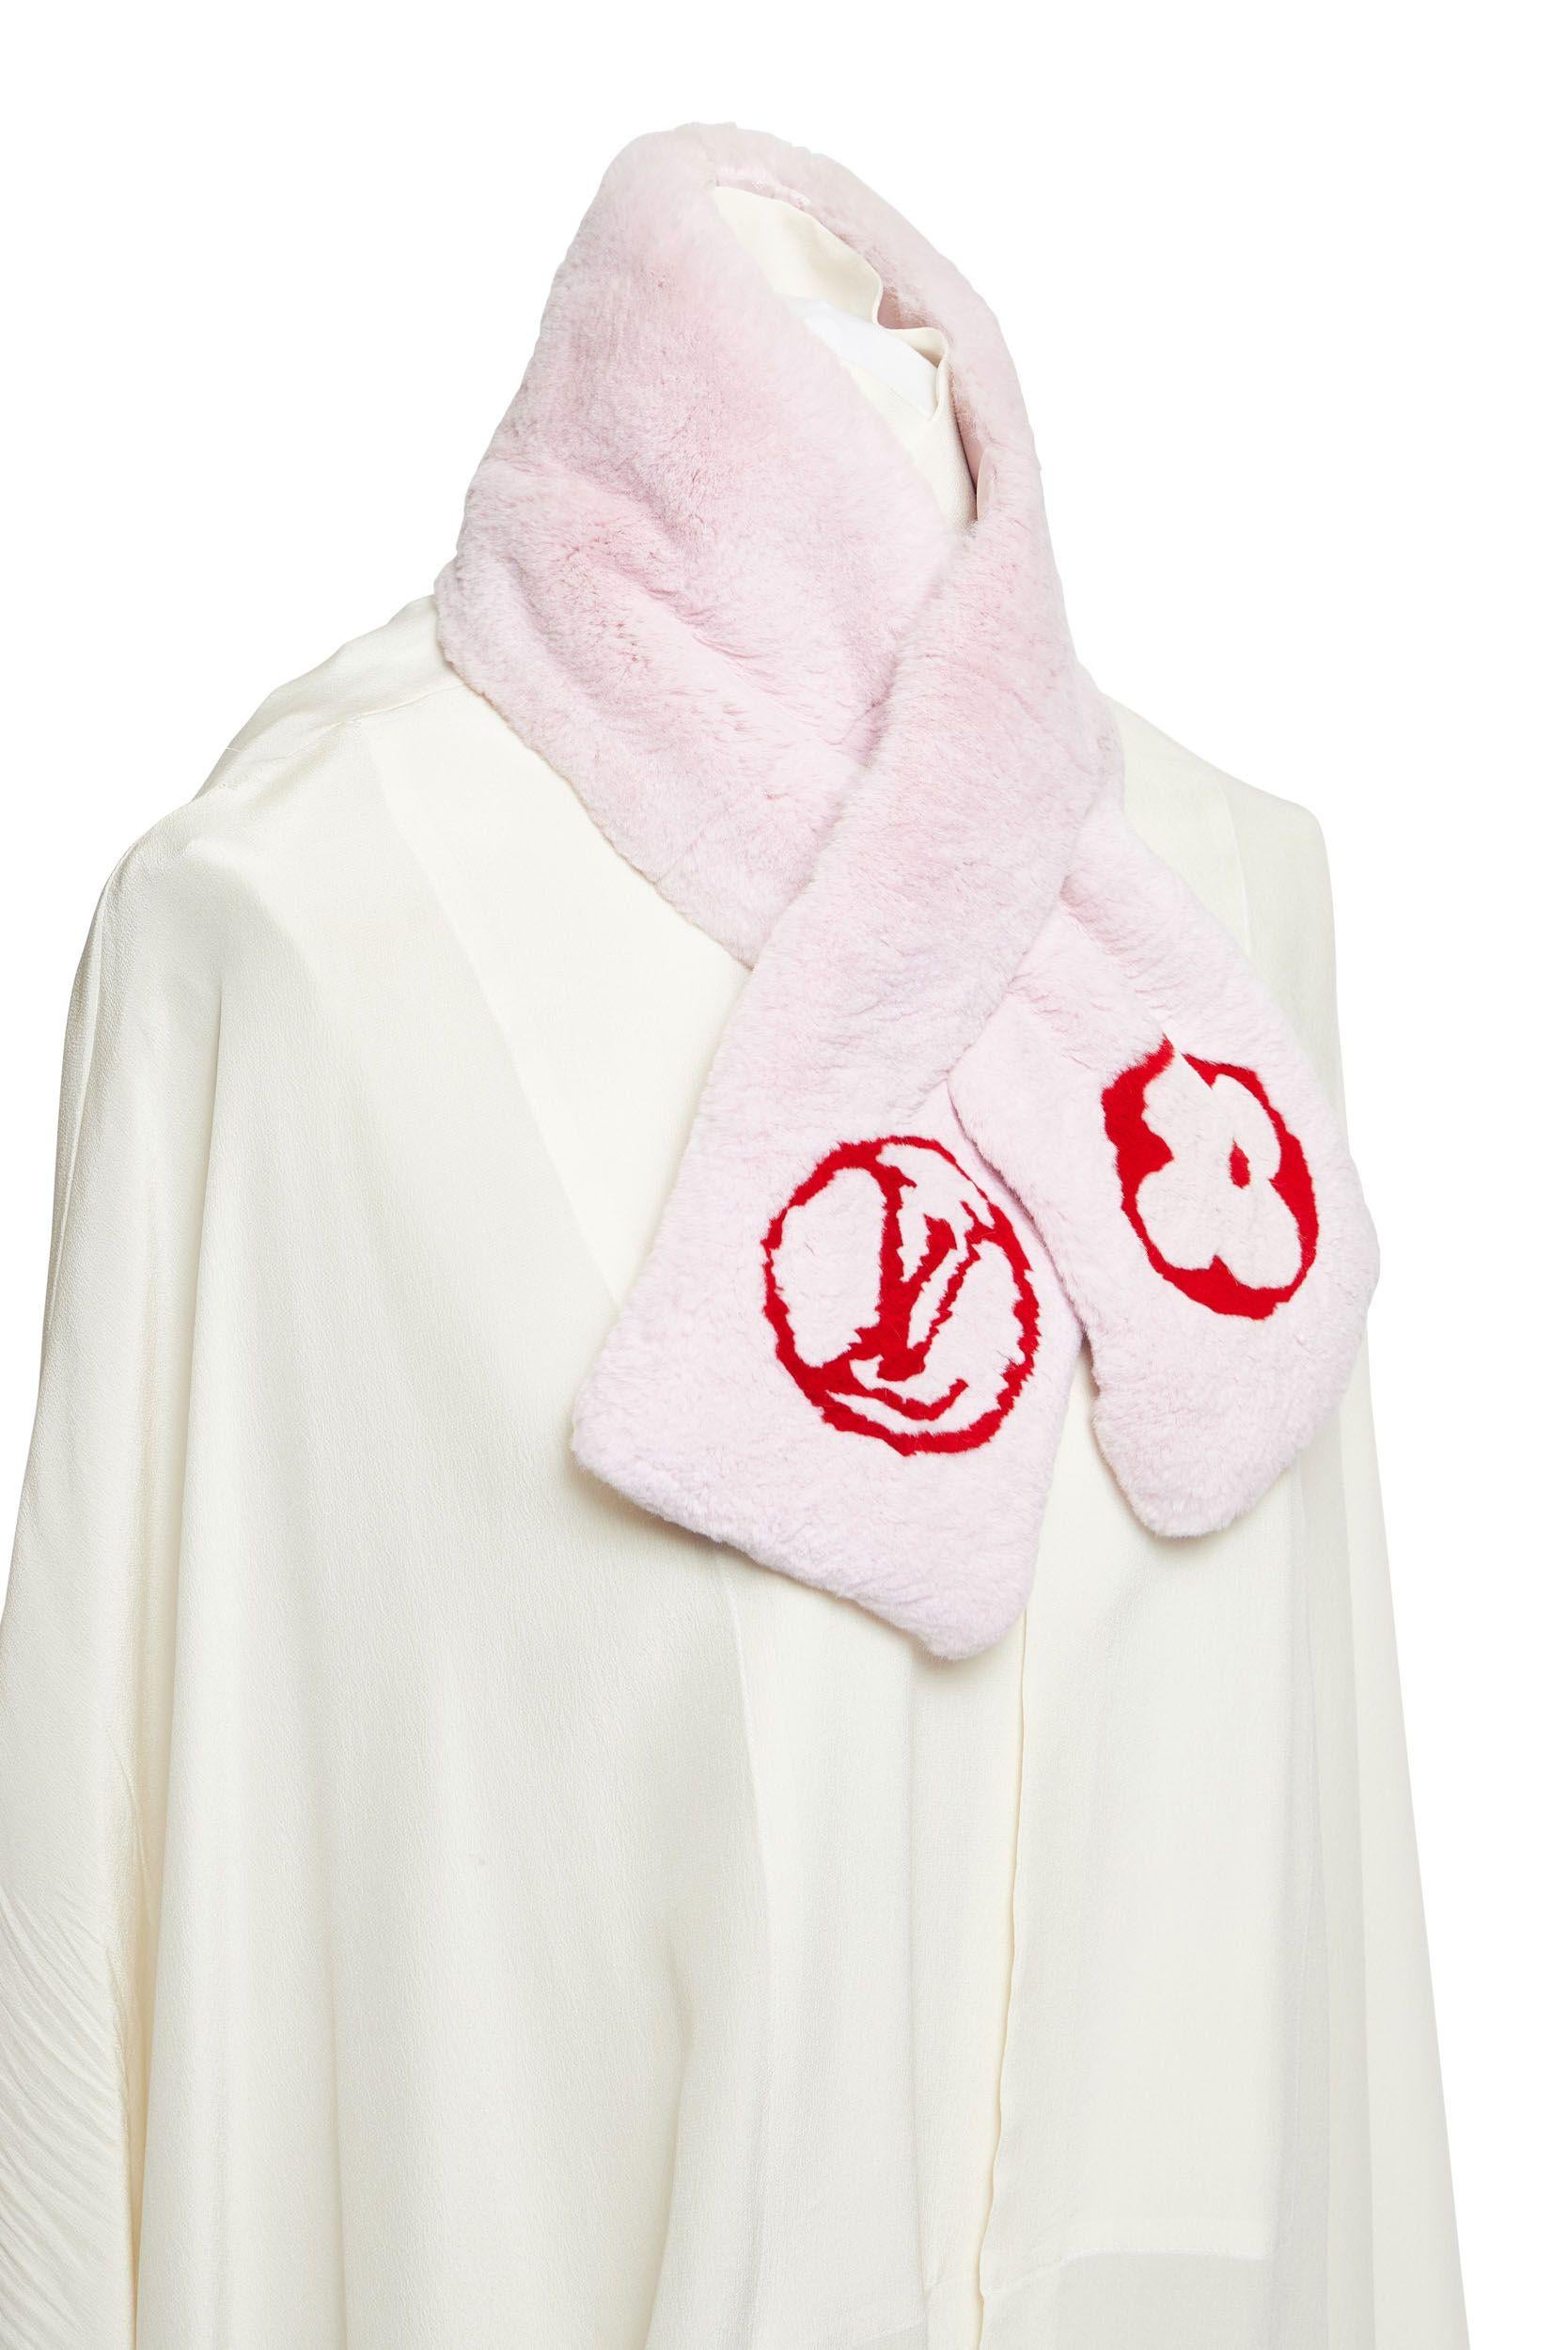 Louis Vuitton pink rabbit scarf with red logo. Characteristic Vuitton interlaced closure. Super soft neck warmer.